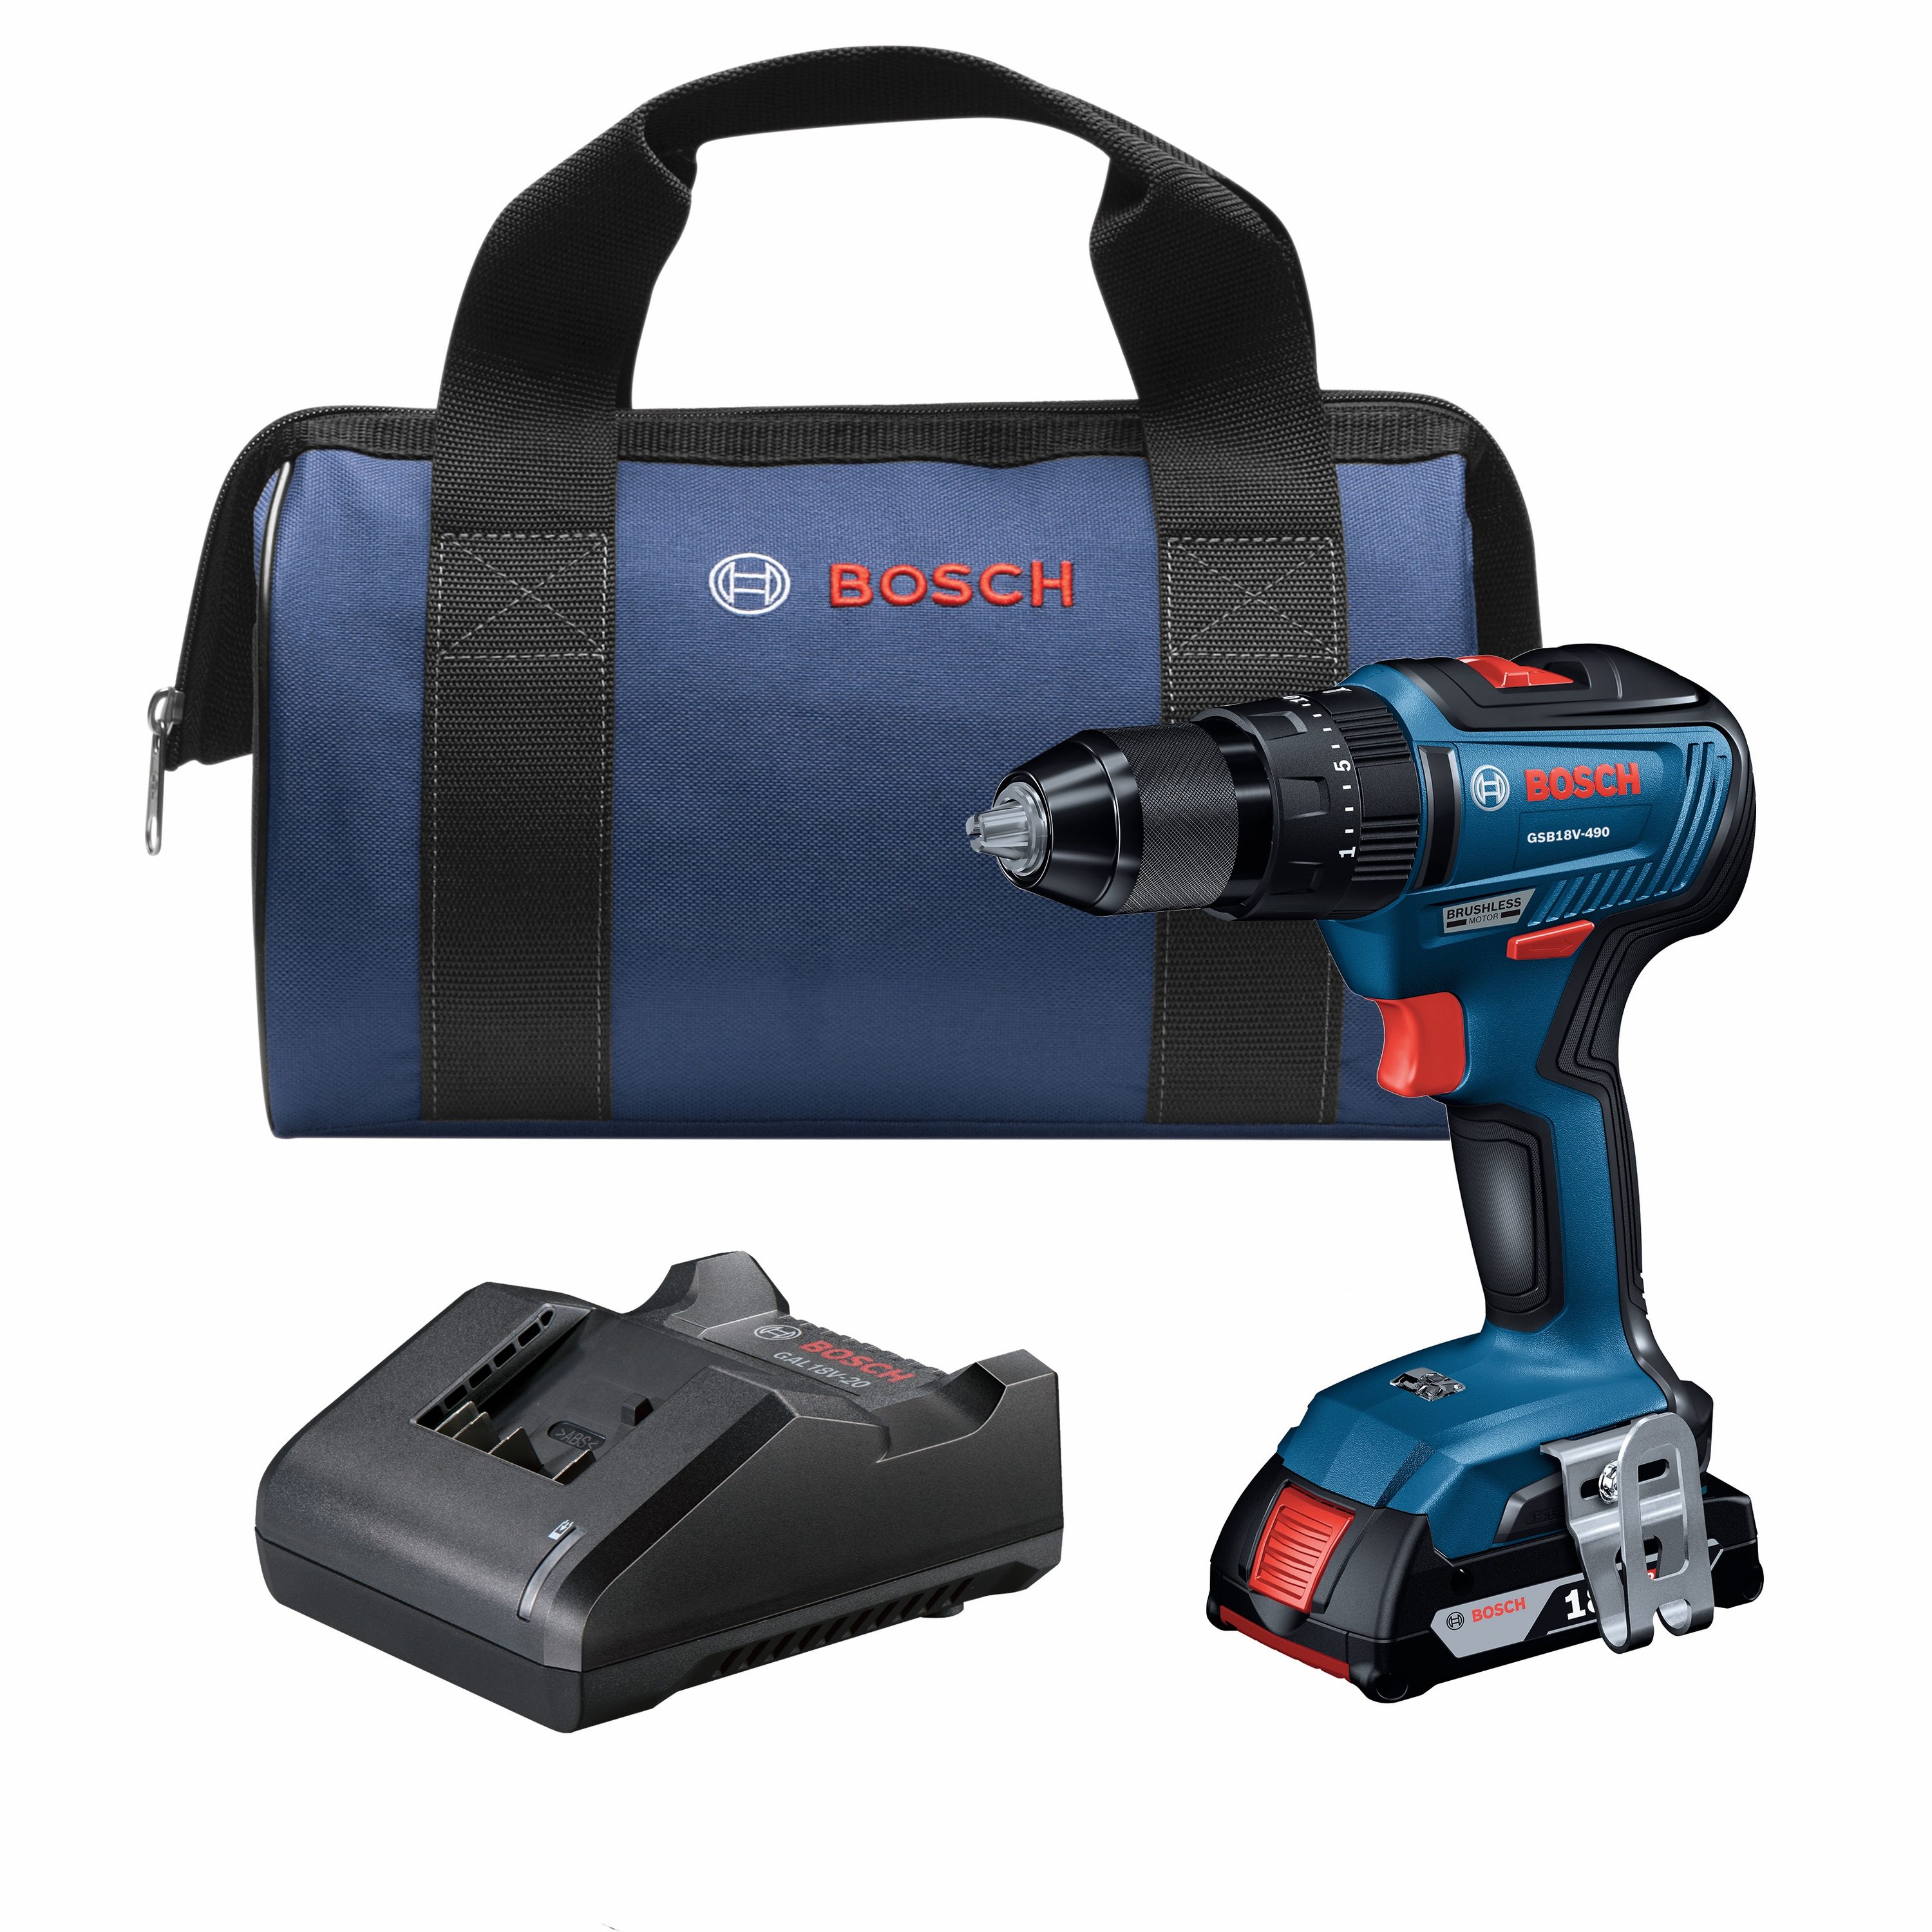 Bosch 1/2-in 18-volt-Amp Variable Speed Brushless Cordless (1-Battery Included) in the Hammer Drills at Lowes.com